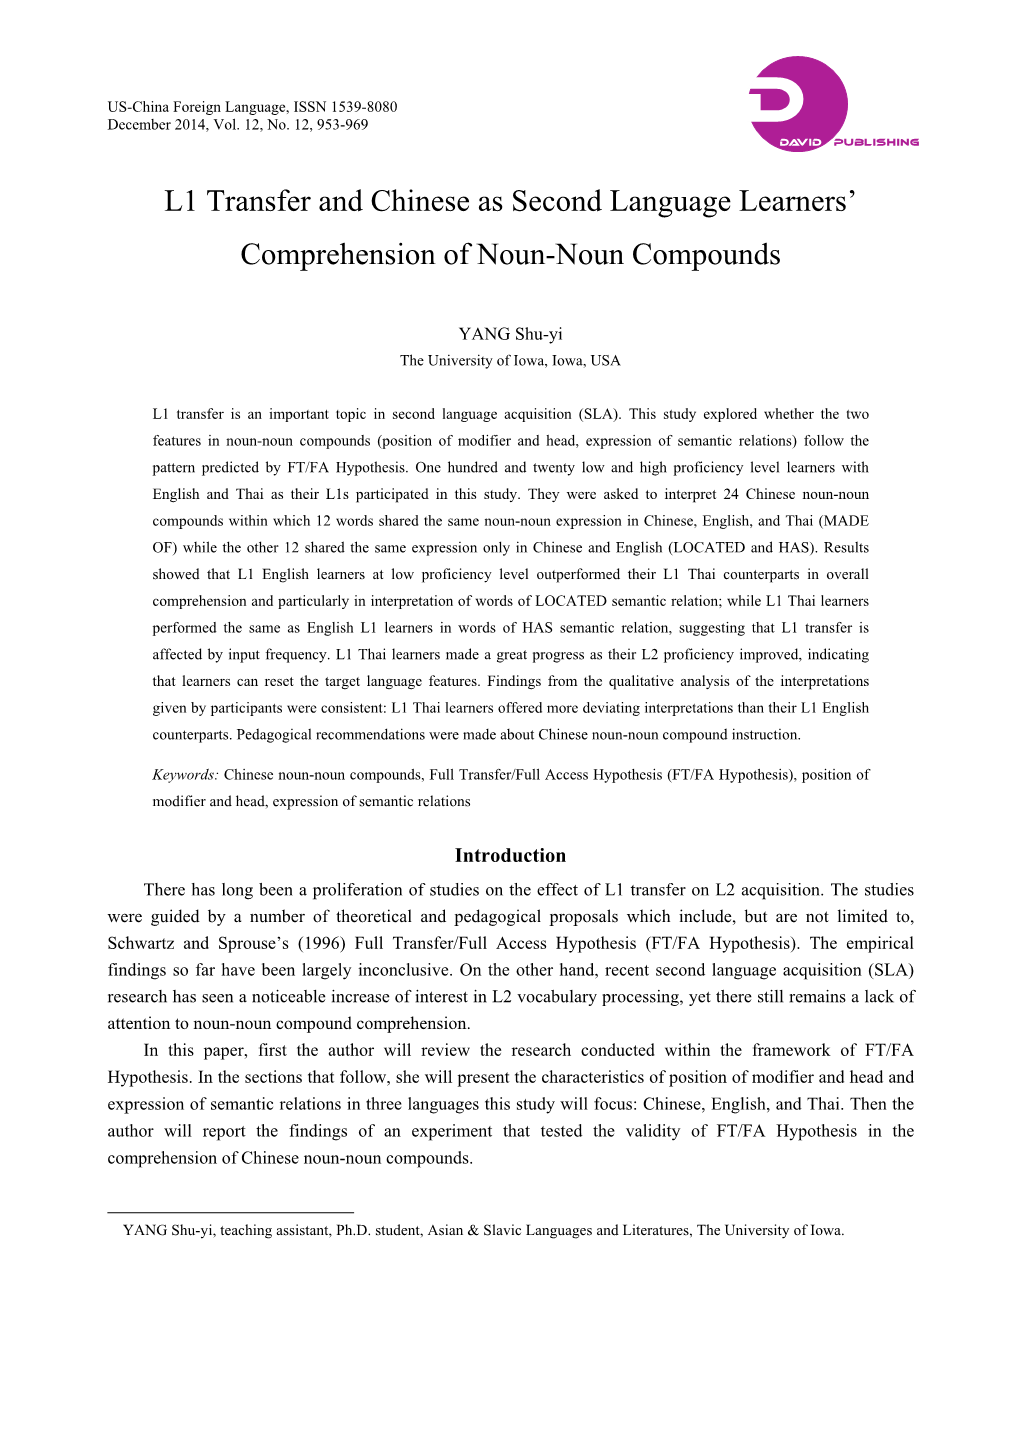 L1 Transfer and Chinese As Second Language Learners’ Comprehension of Noun-Noun Compounds